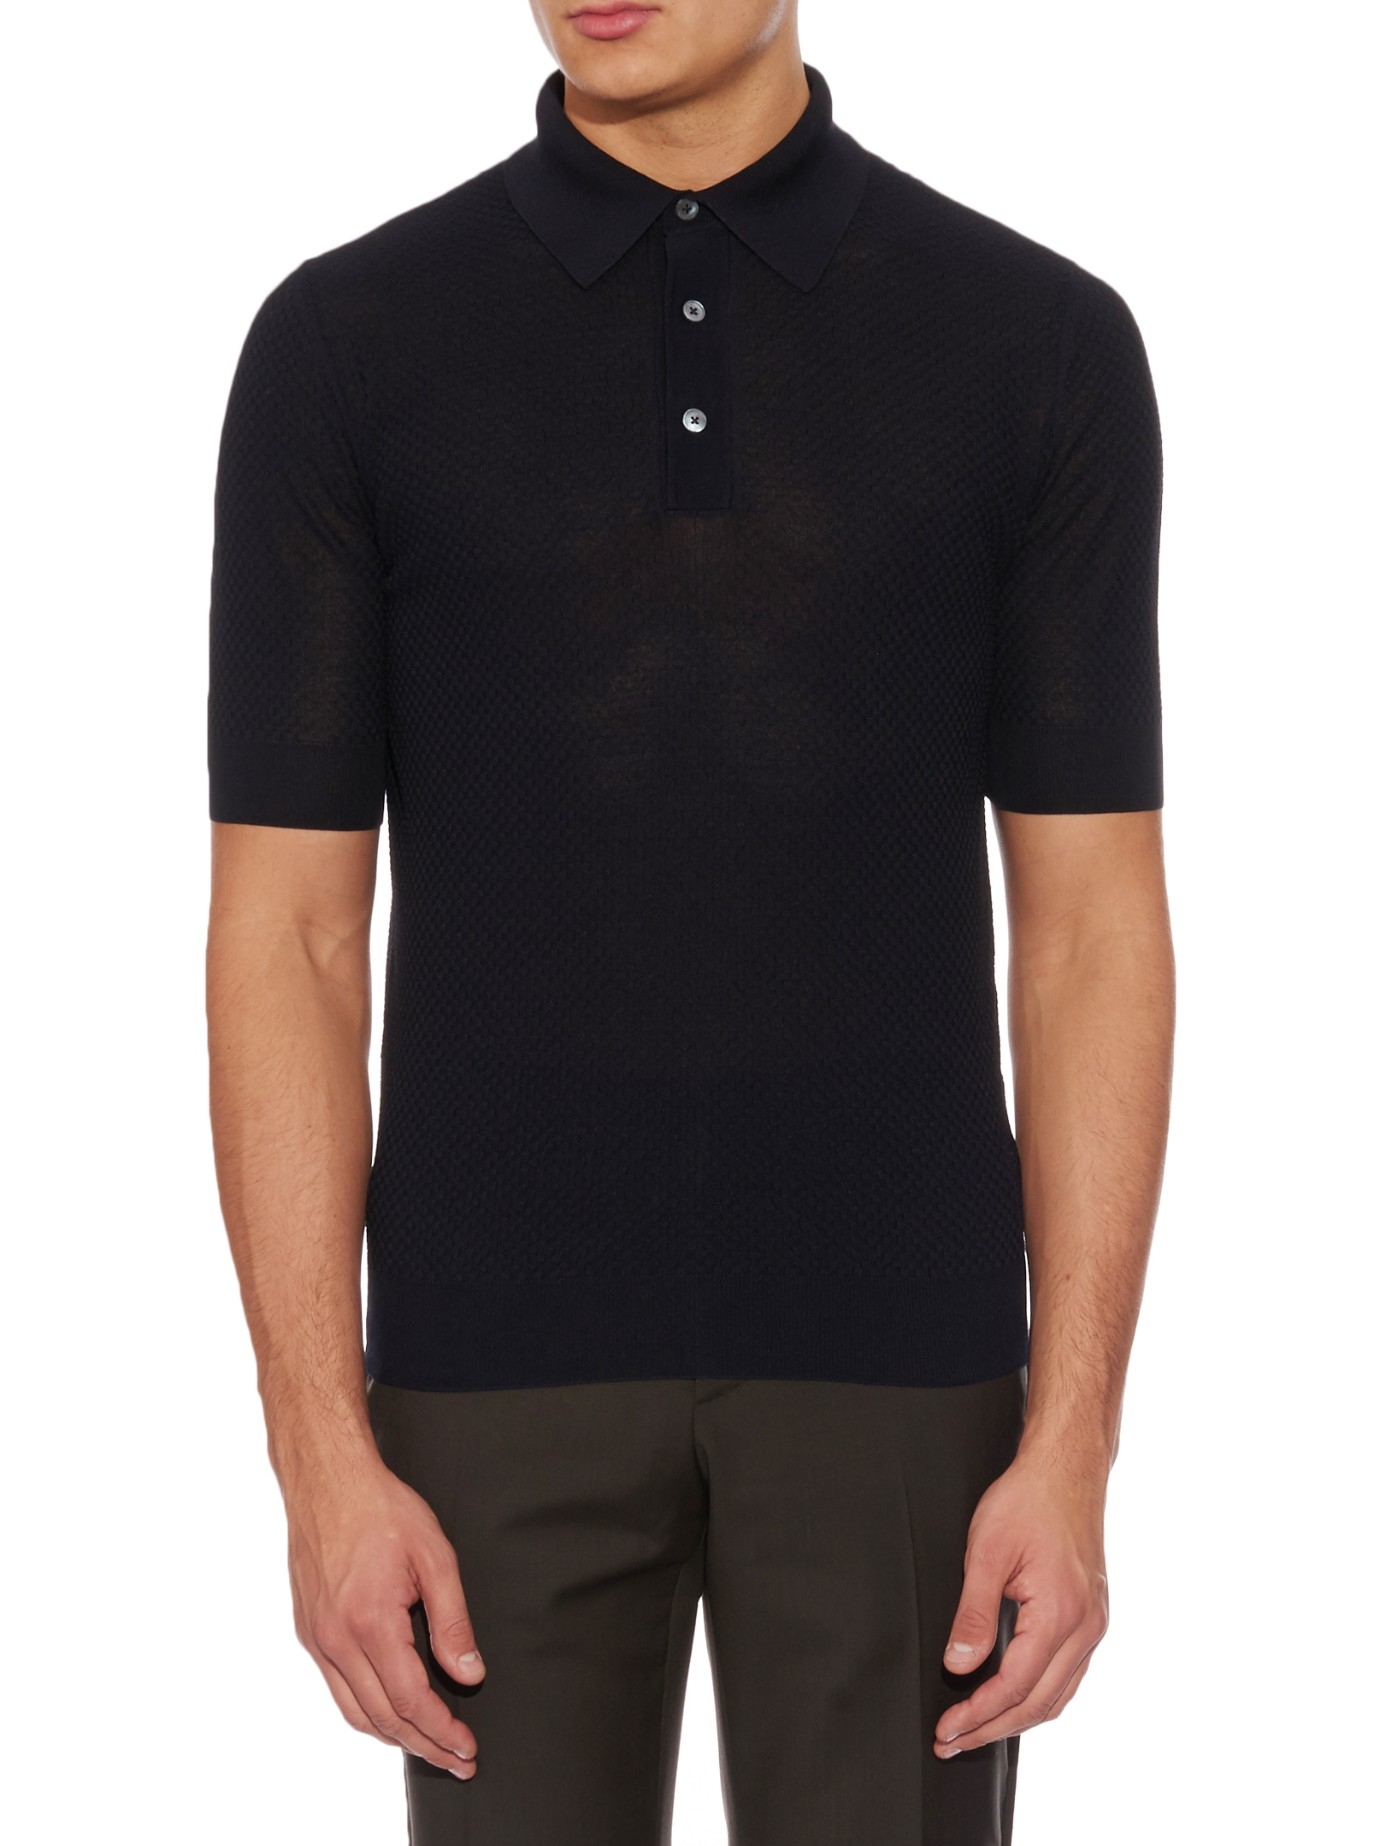 Dunhill Waffle-knit Mulberry Silk Polo Shirt in Navy (Blue) for Men - Lyst